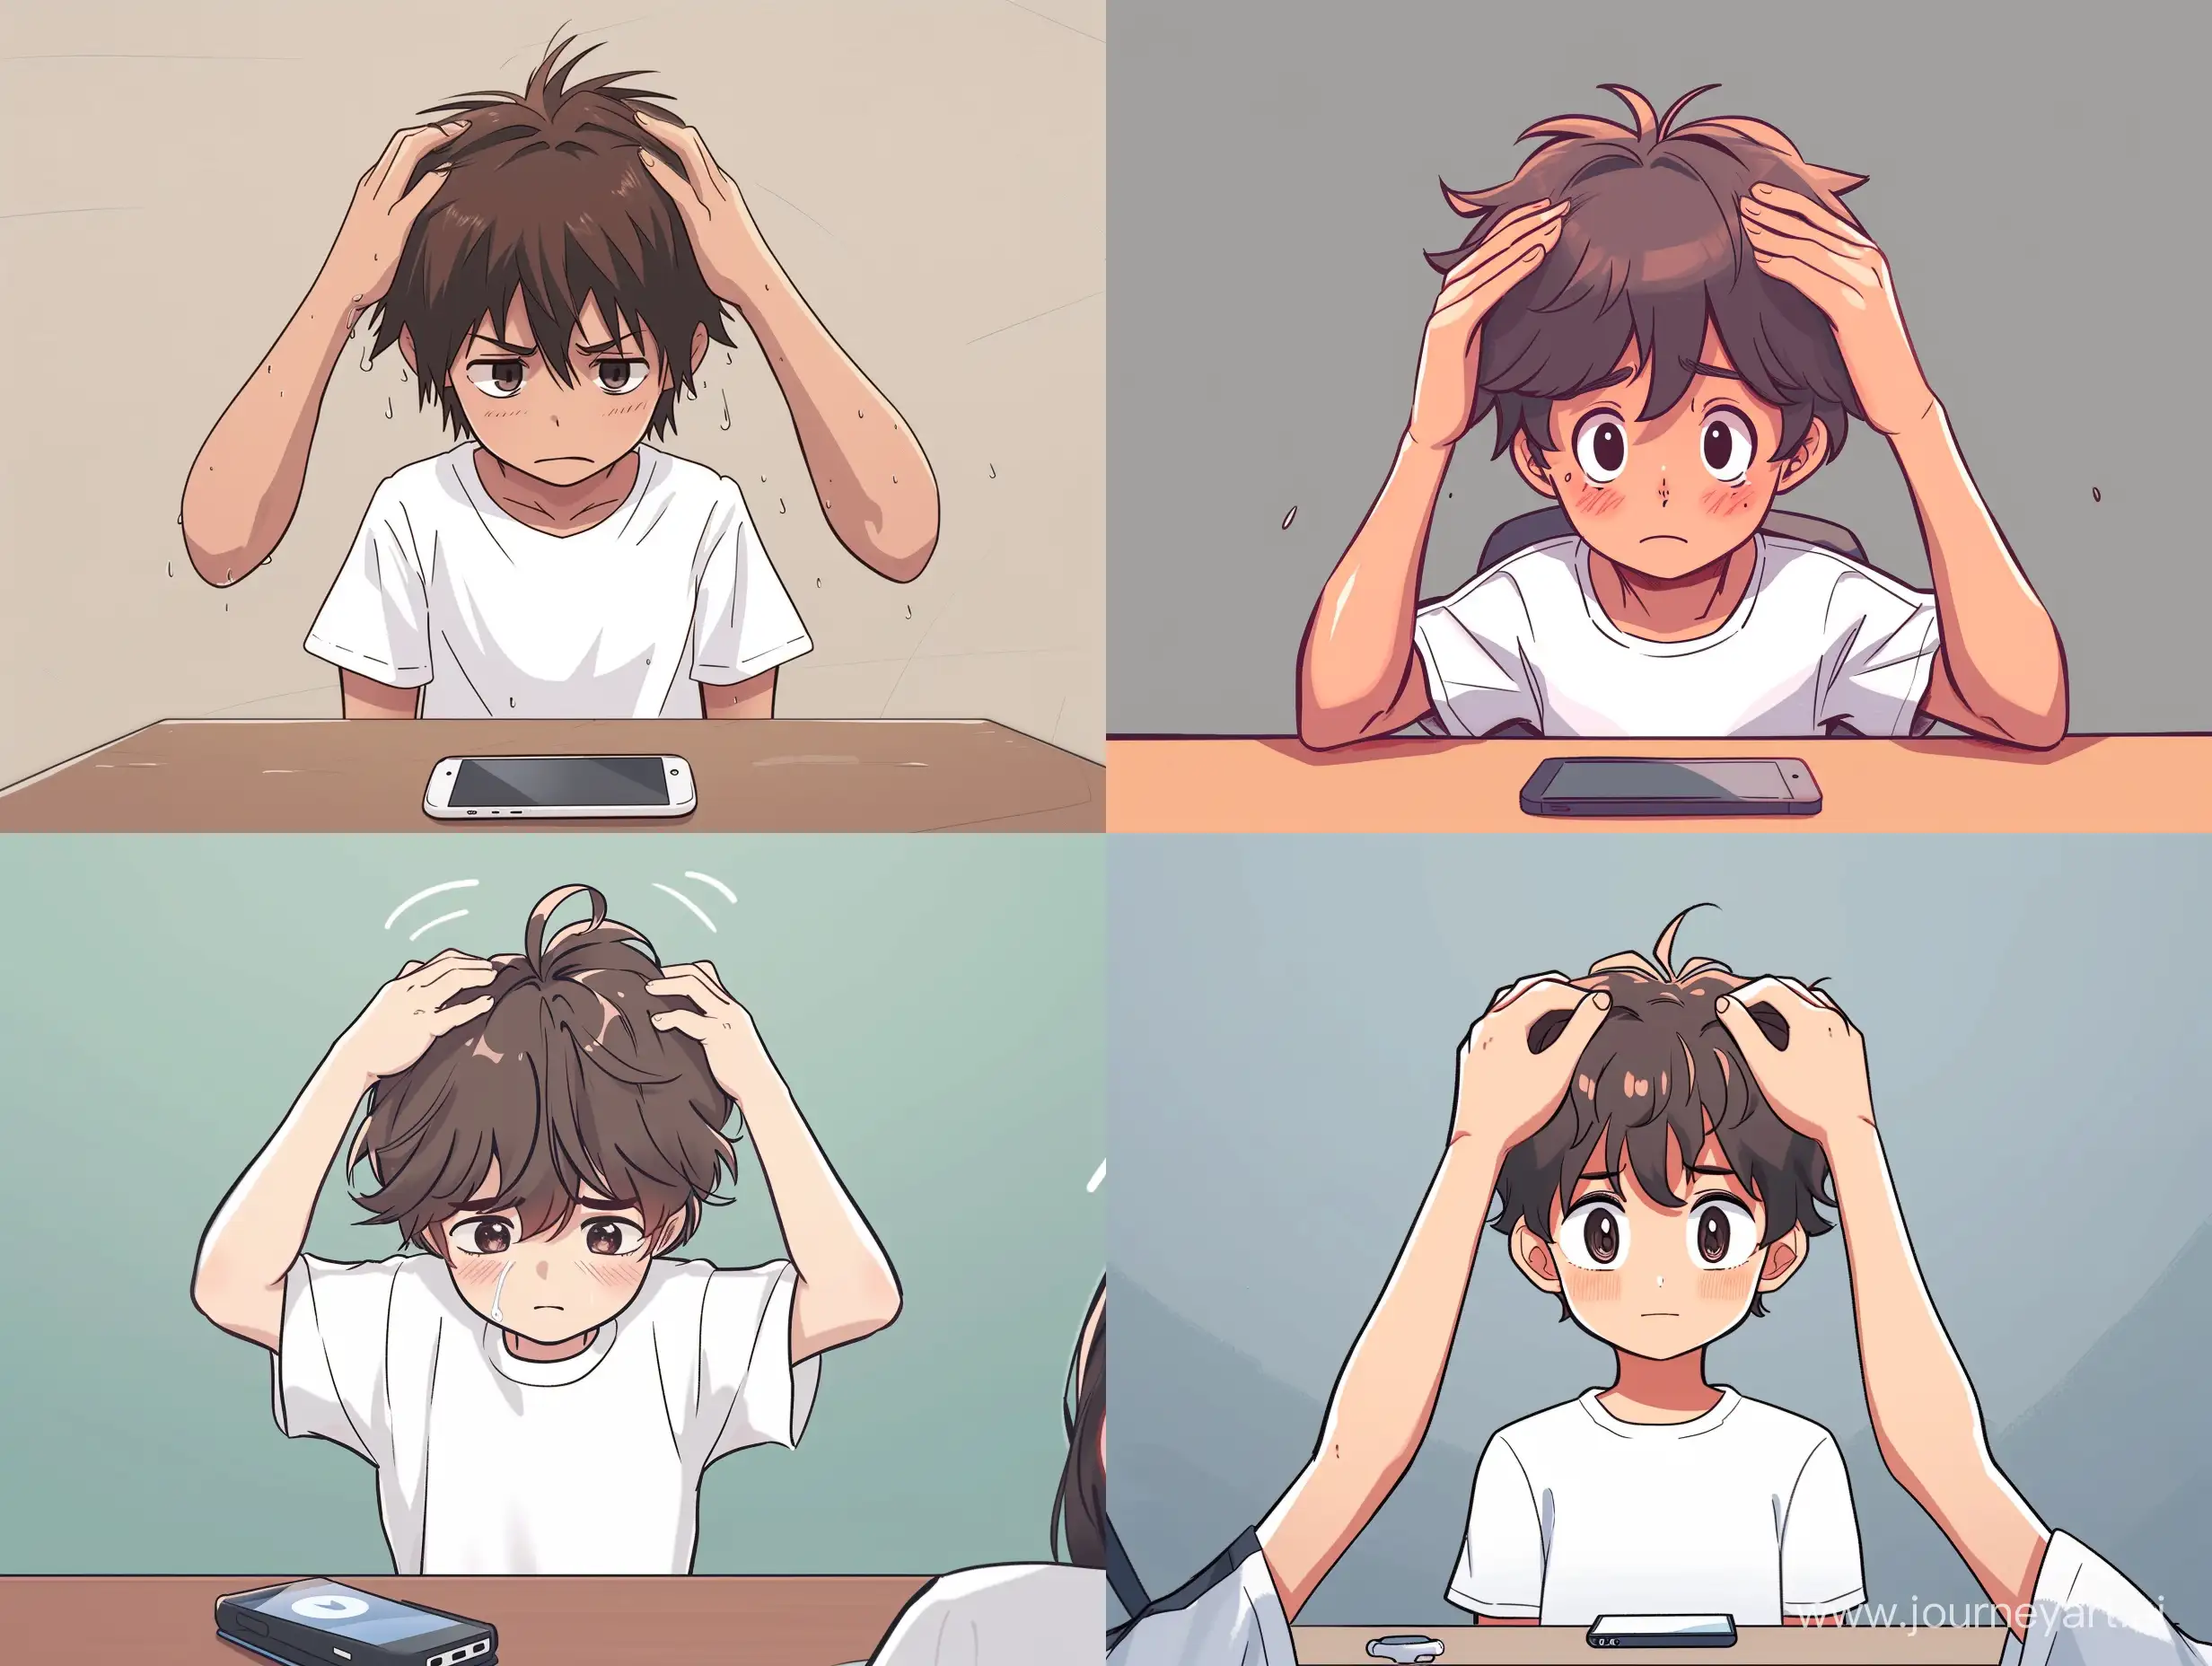 Desperate-Boy-Bowing-to-Table-with-Smartphone-in-Anime-Style